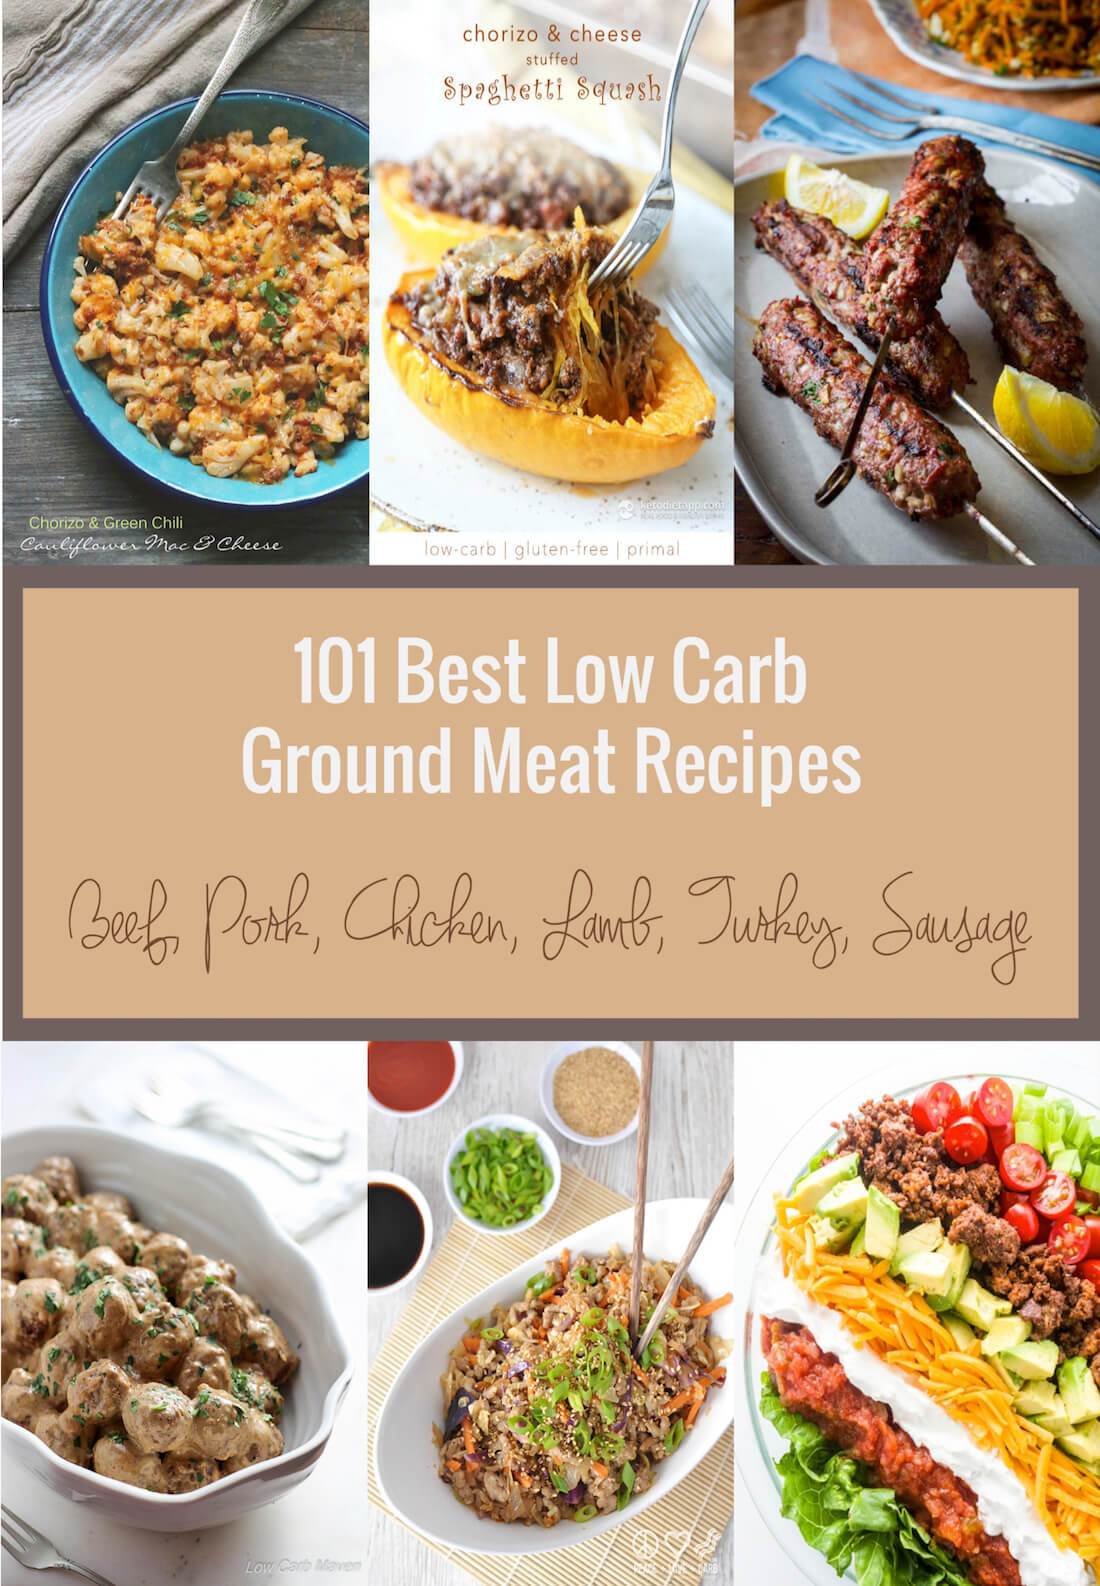 101 Low Carb Recipes
 101 Best Low Carb Ground Meat Recipes